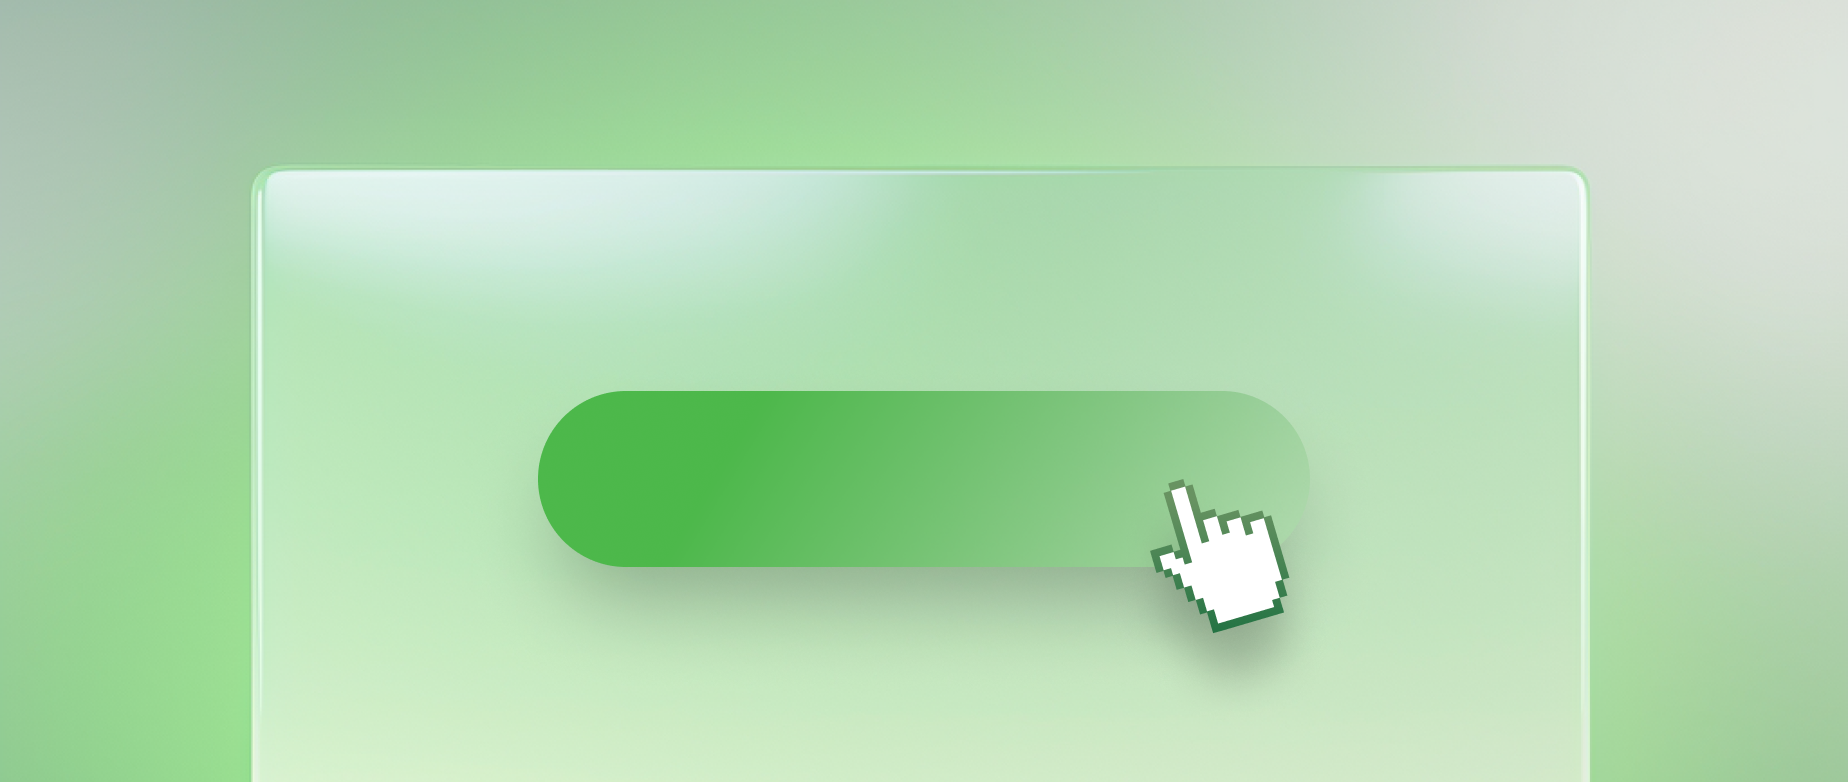 Abstract illustration of a call-to-action button with a mouse pointer.